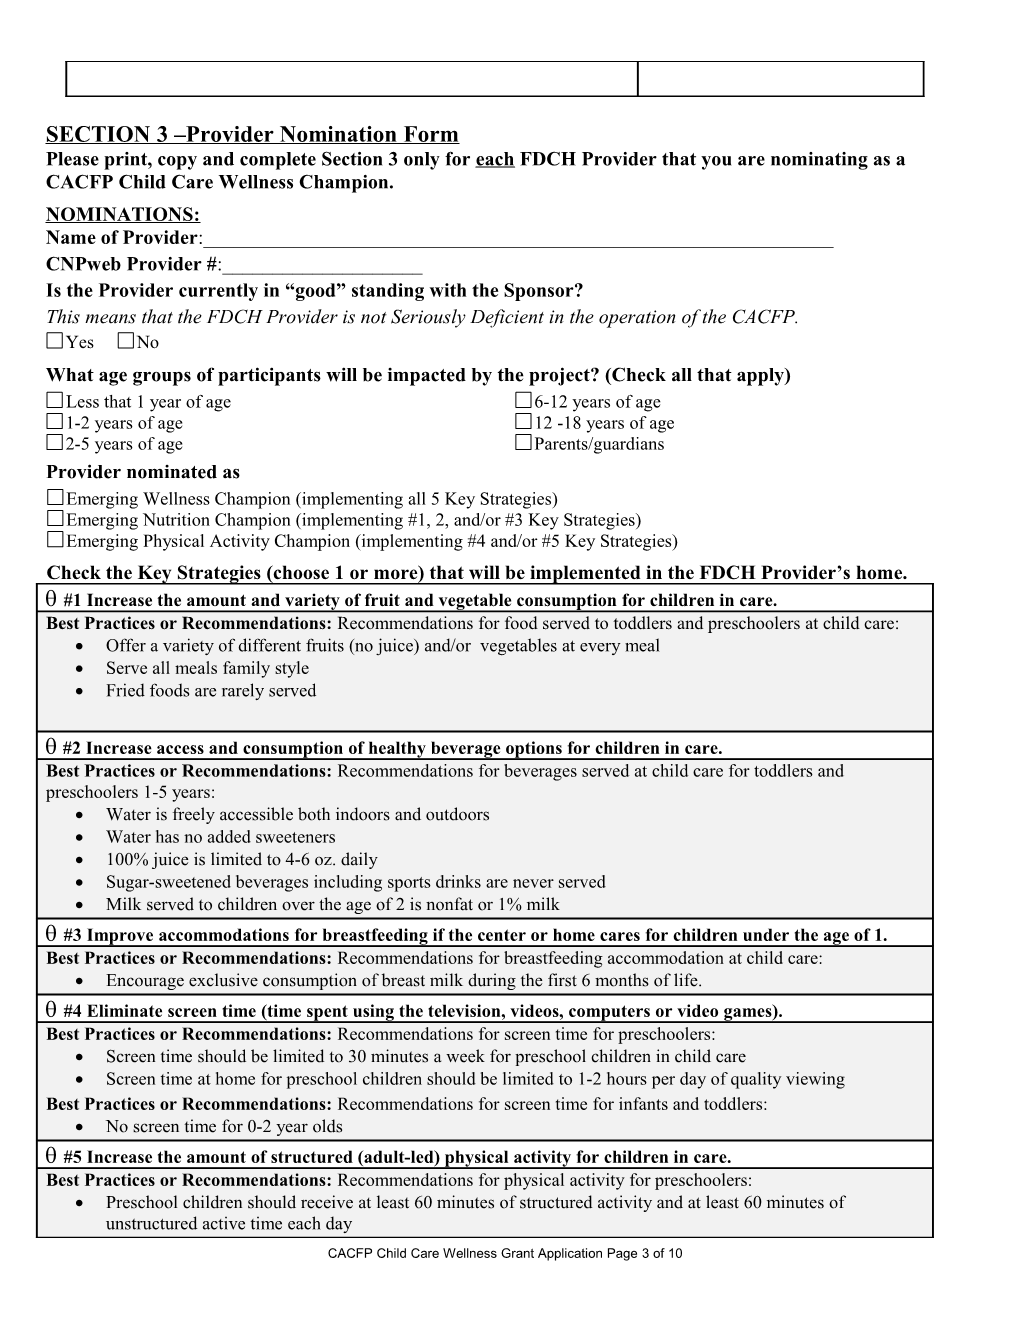 CACFP Child Care Wellness Grant Application Page 1 of 8